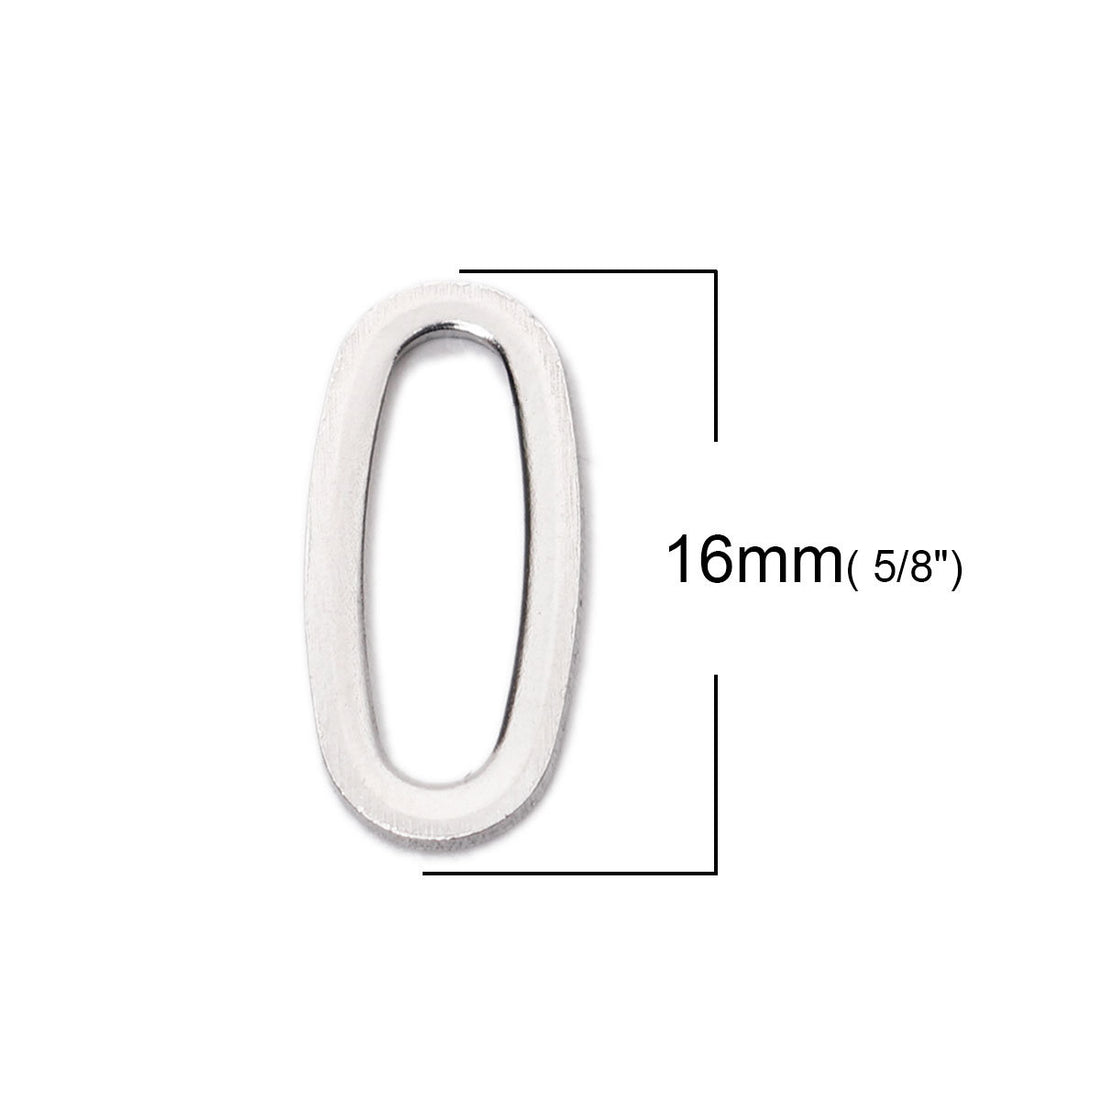 Hypoallergenic Silver Oval JumpRings 16mm - 5pcs Stainless Steel Closed Jump Rings